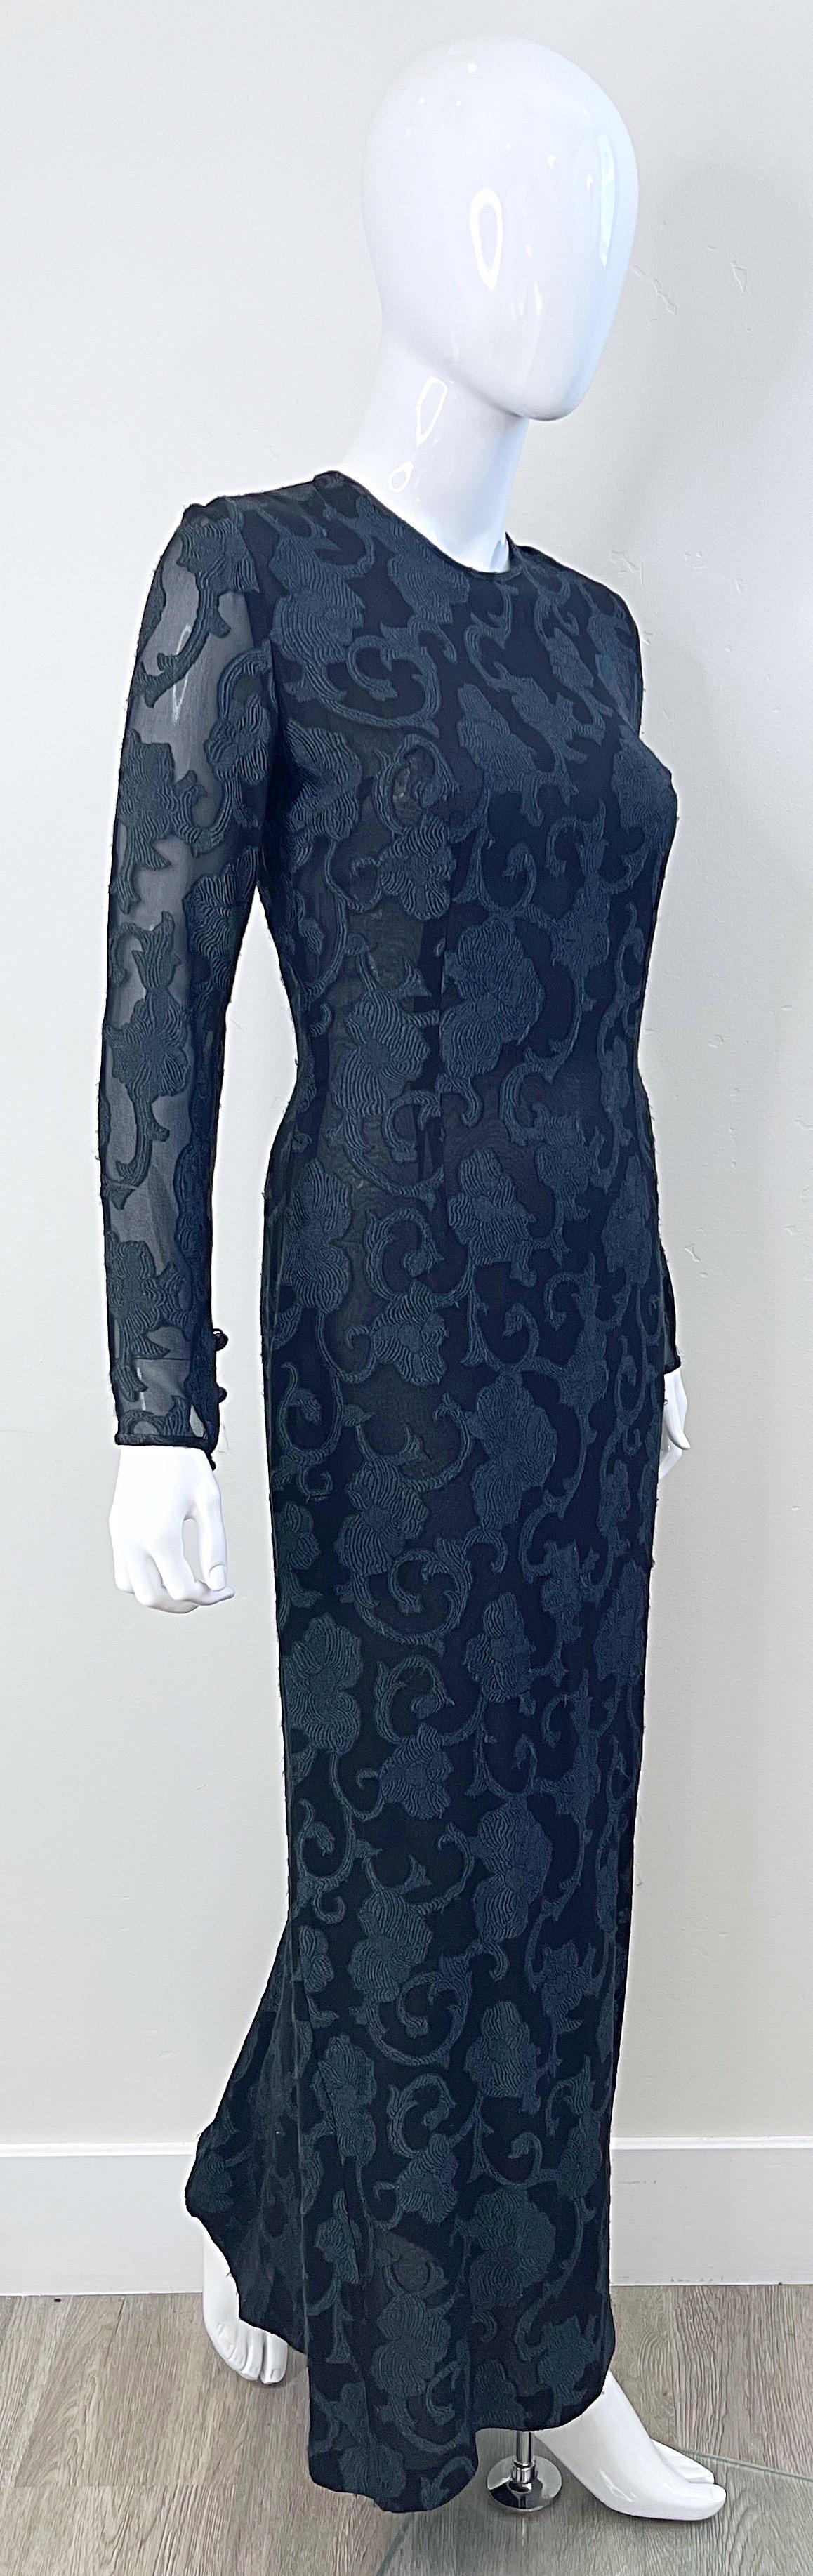 1990s James Purcell Couture Black Silk Chiffon Semi Sheer Filigree Print Gown  For Sale 8